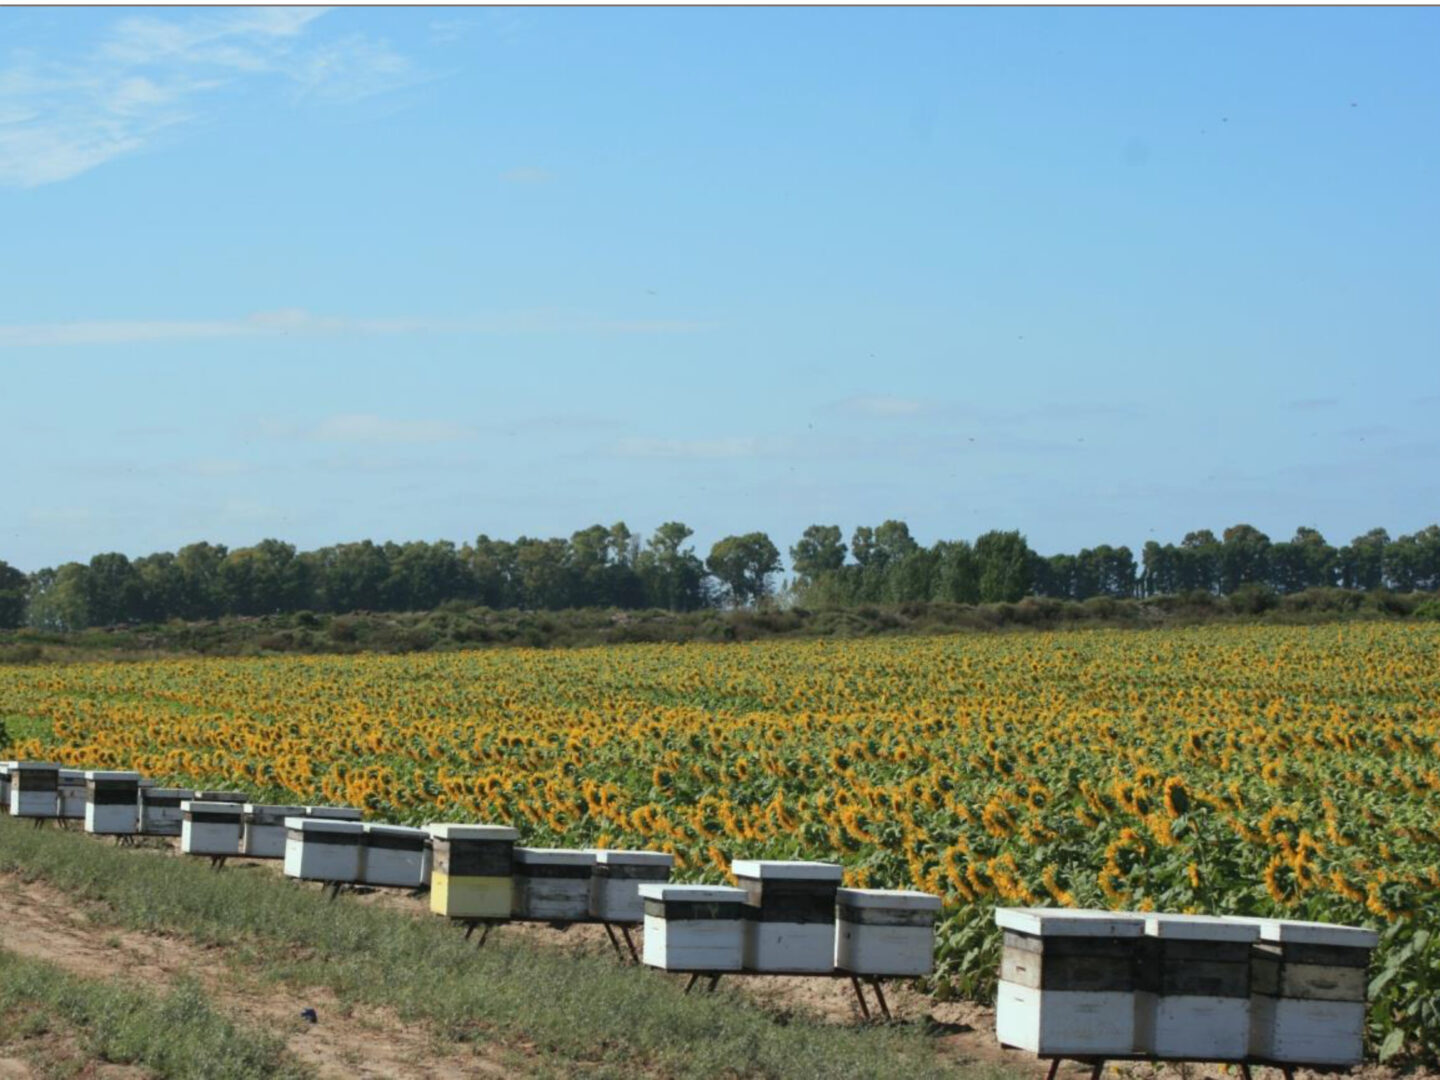 This image shows man made bee hives alongside a sunflower field credit walter farina